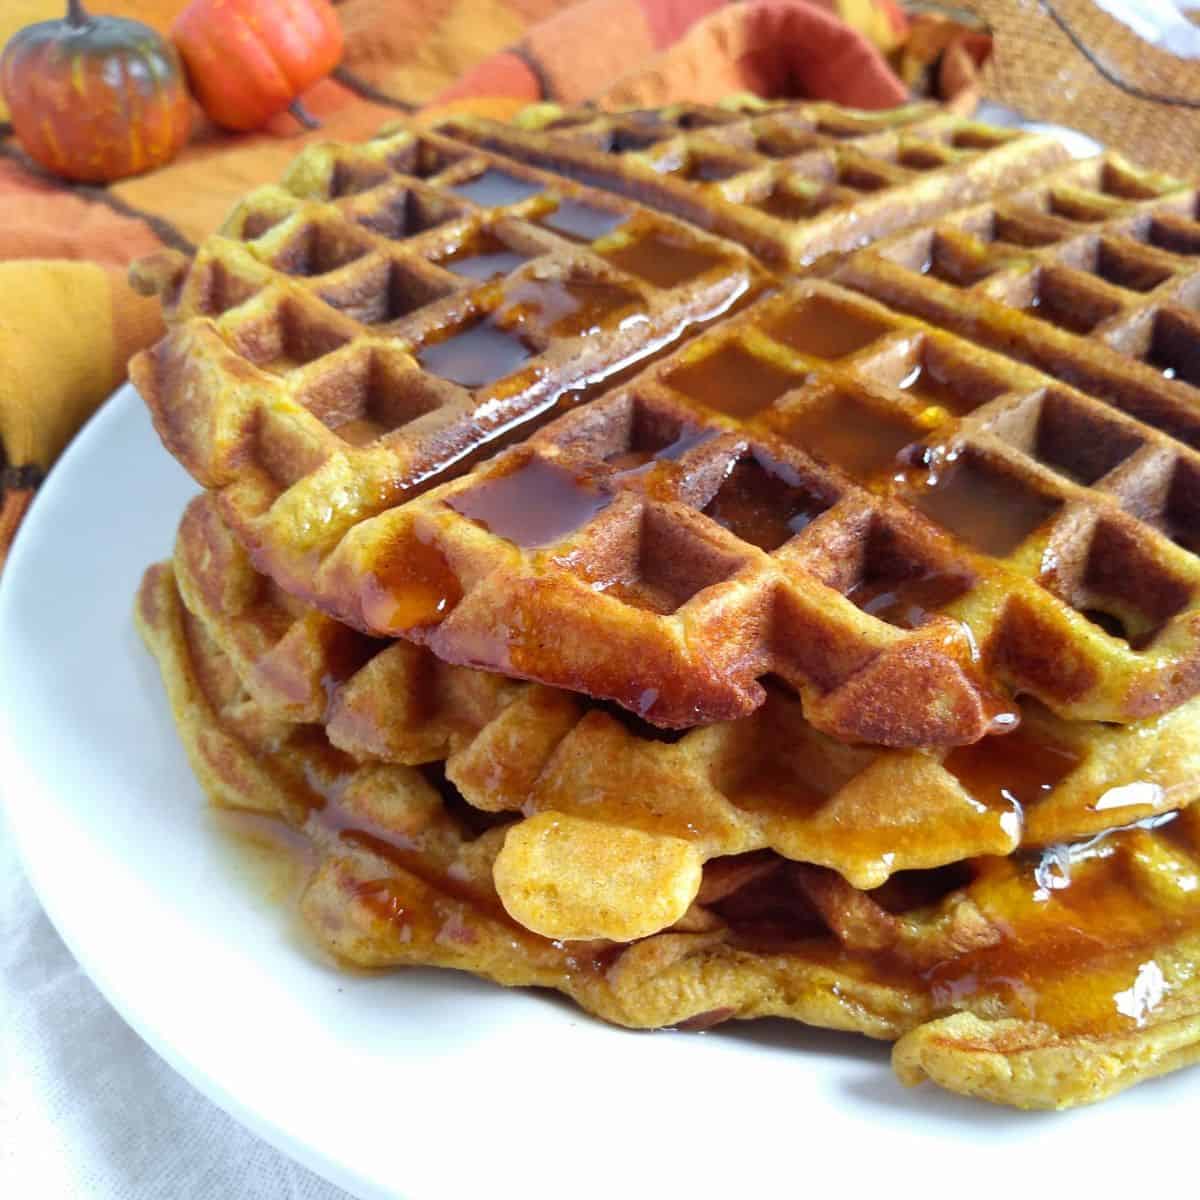 A stack of yeasted pumpkin waffles on a white plate. The waffles are covered in maple syrup.